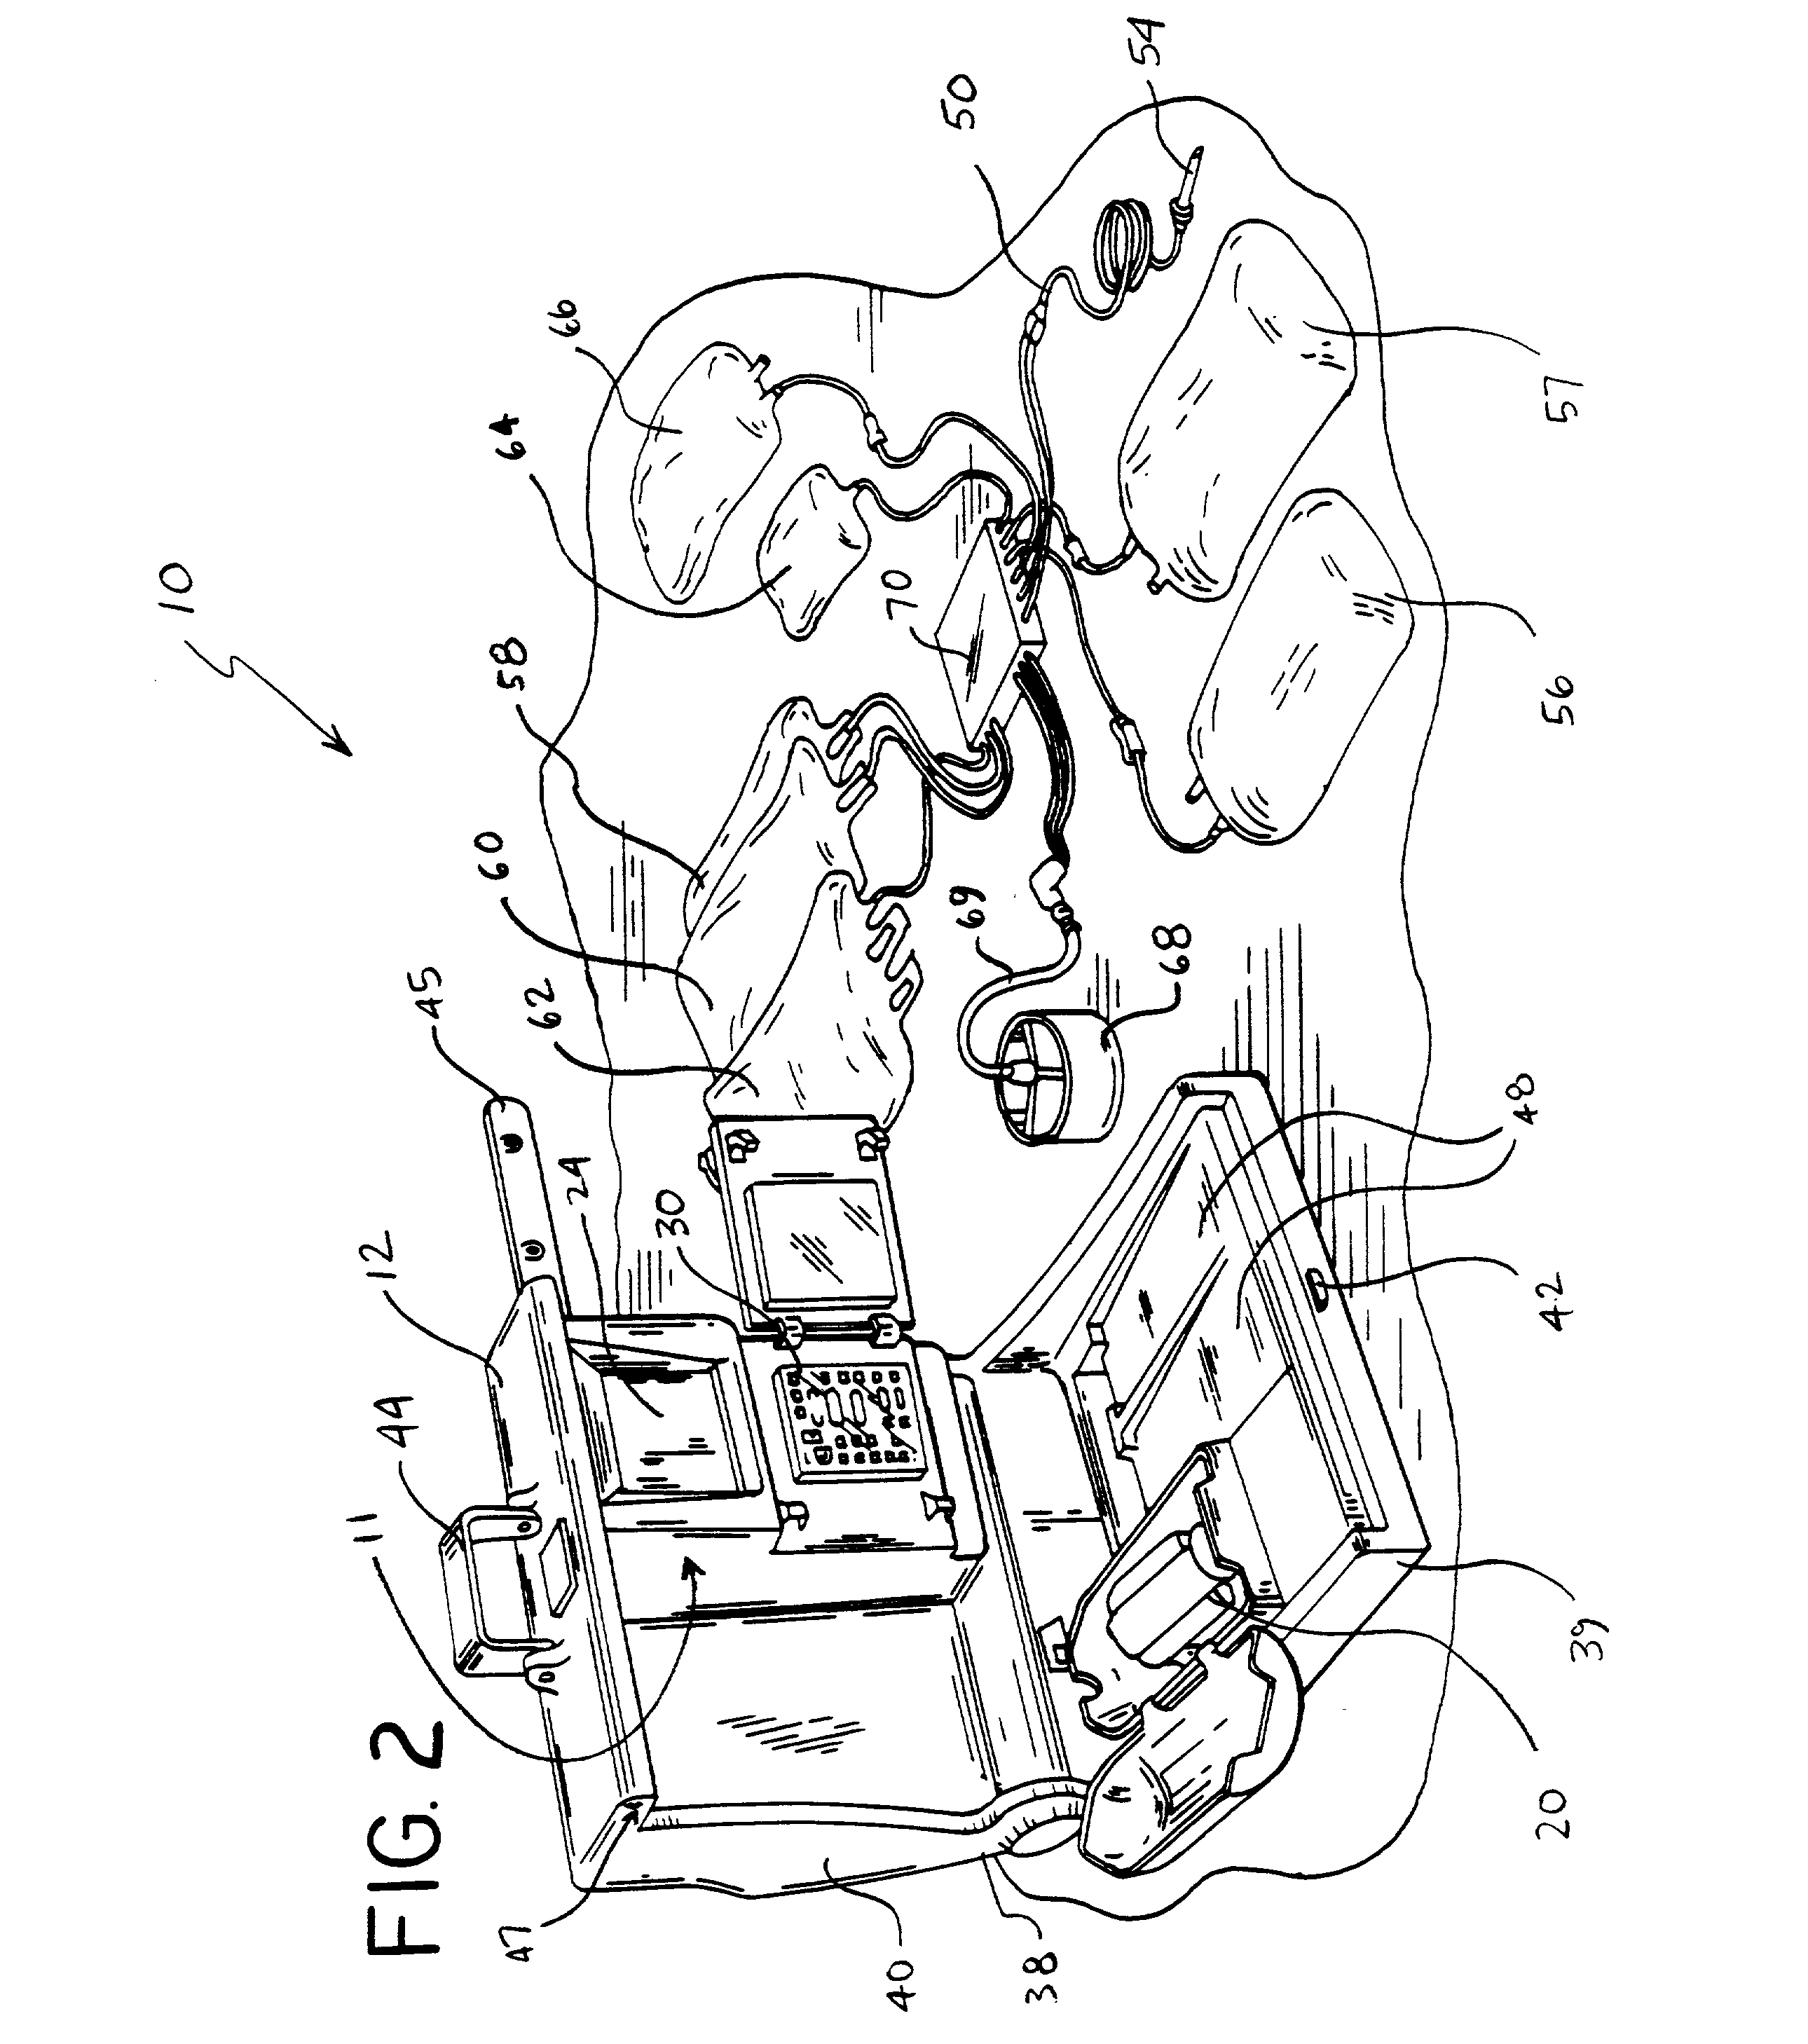 Multi-purpose, automated blood and fluid processing systems and methods